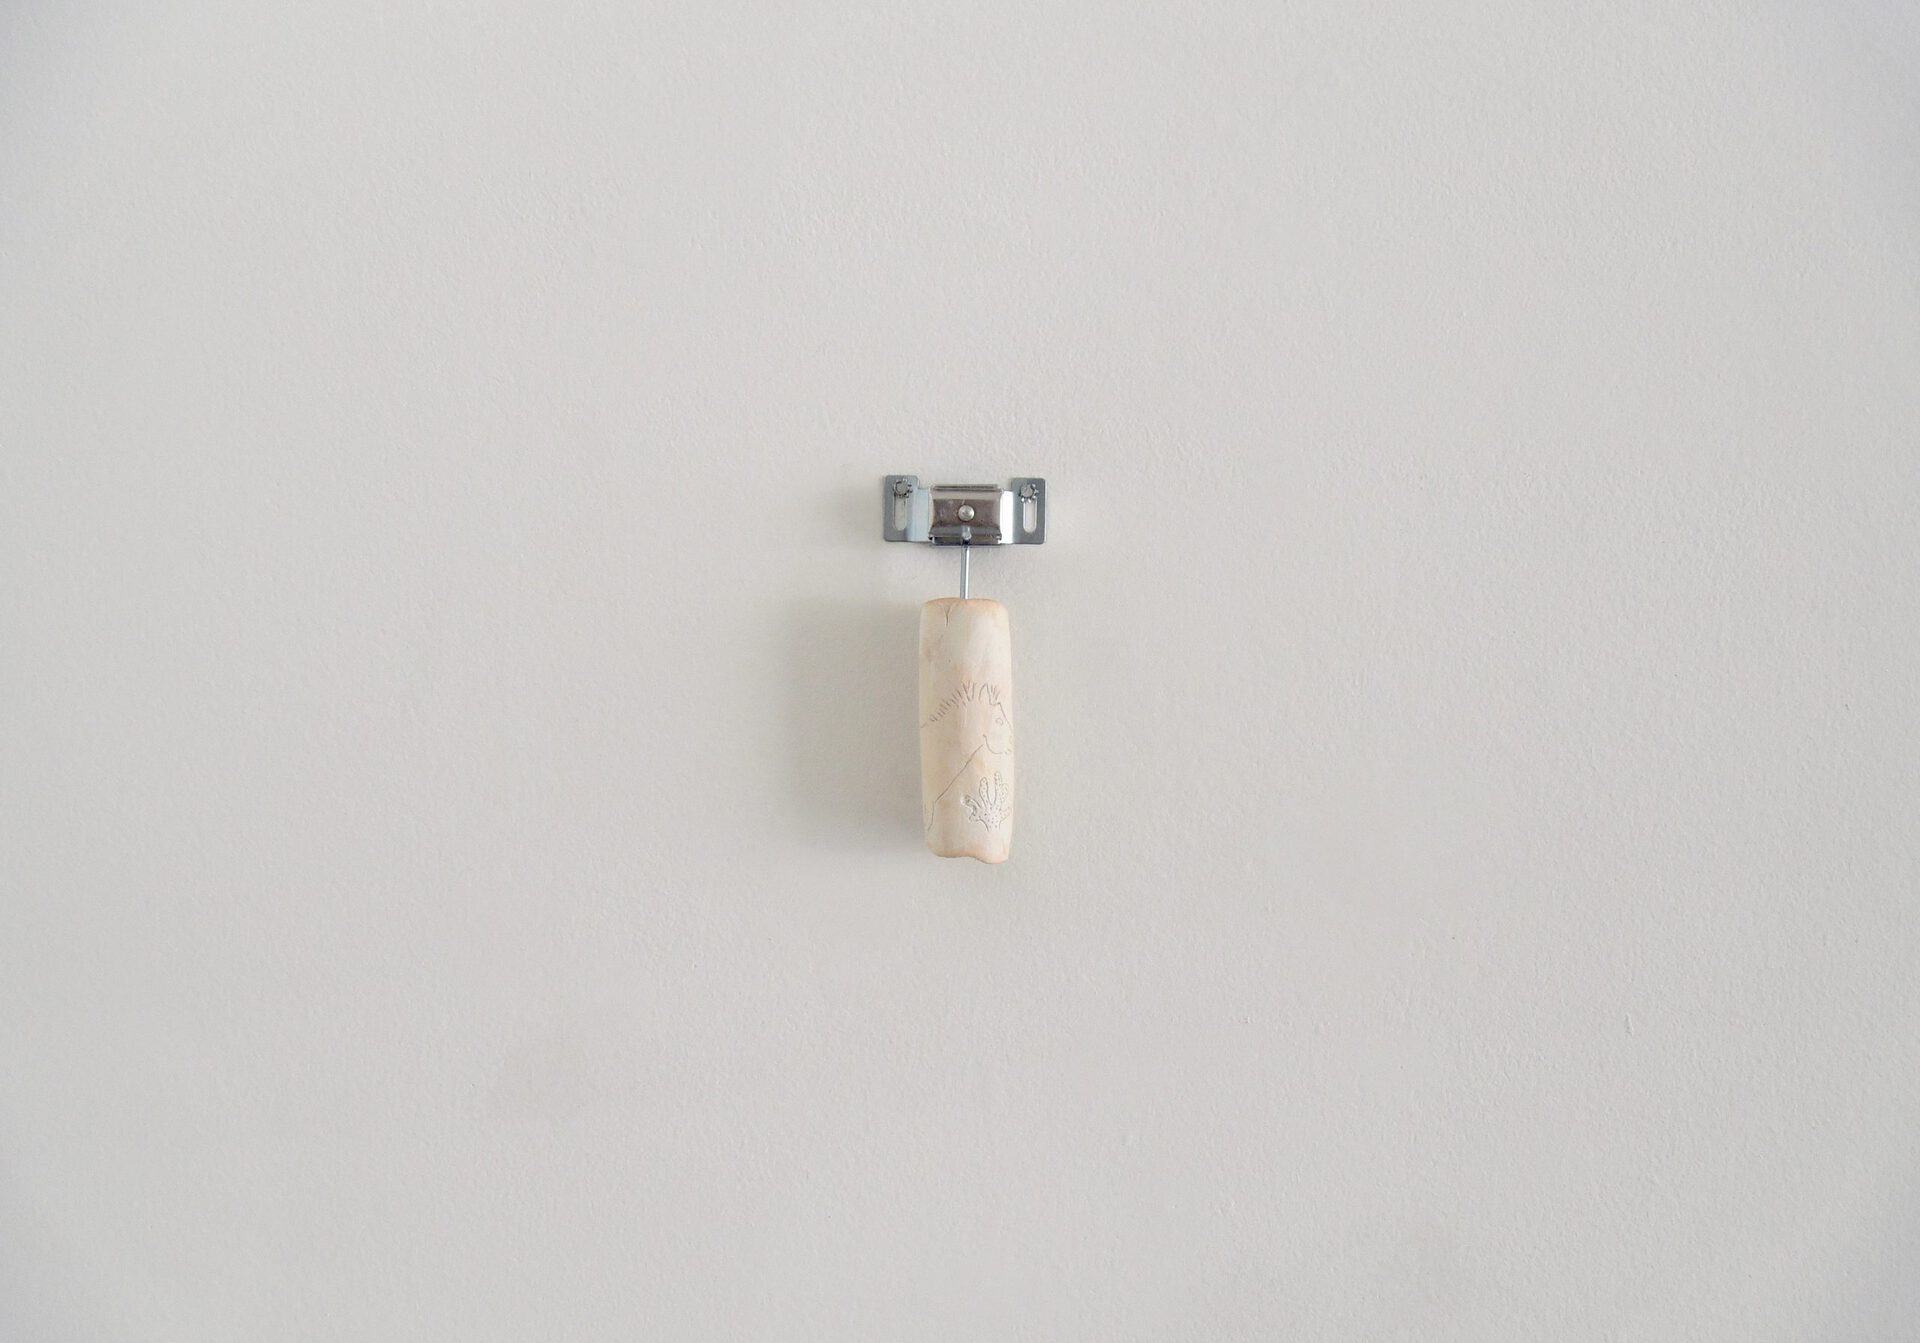 Brea Campbell-Stewart, Untitled ii, 2021, Clay and hardware, 1.5” x 6” x 1.5”.